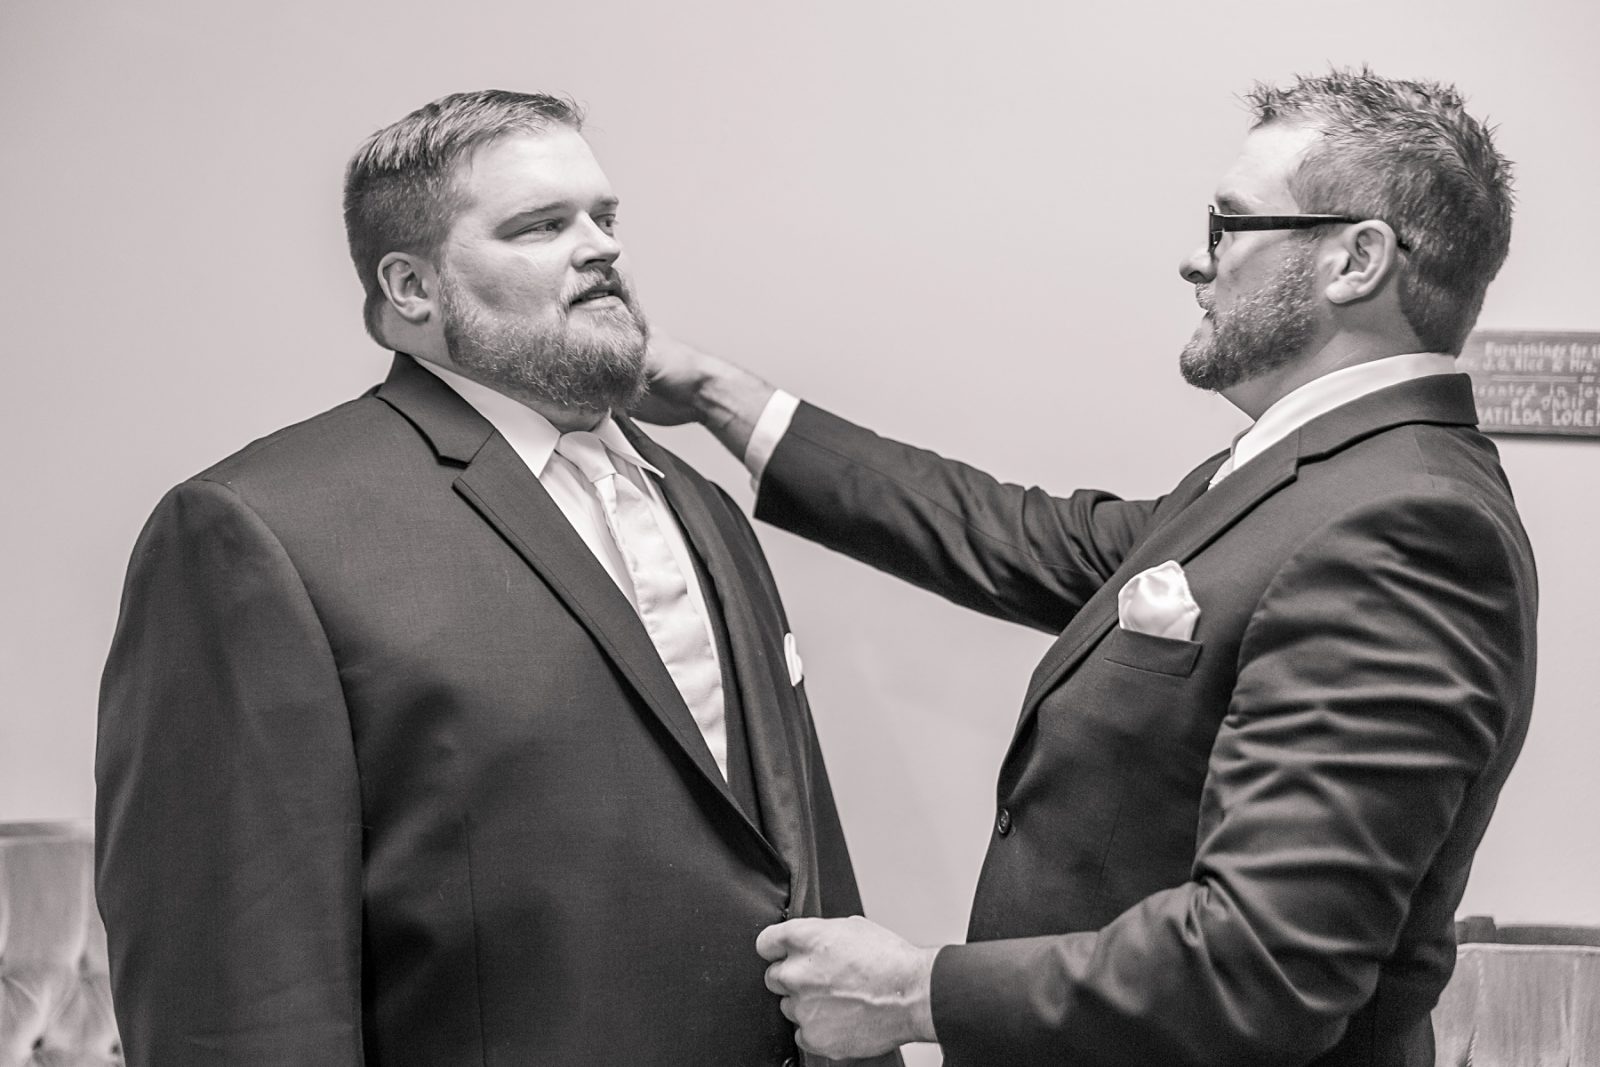 Wedding photography by Diana Gramlich, groom and best man